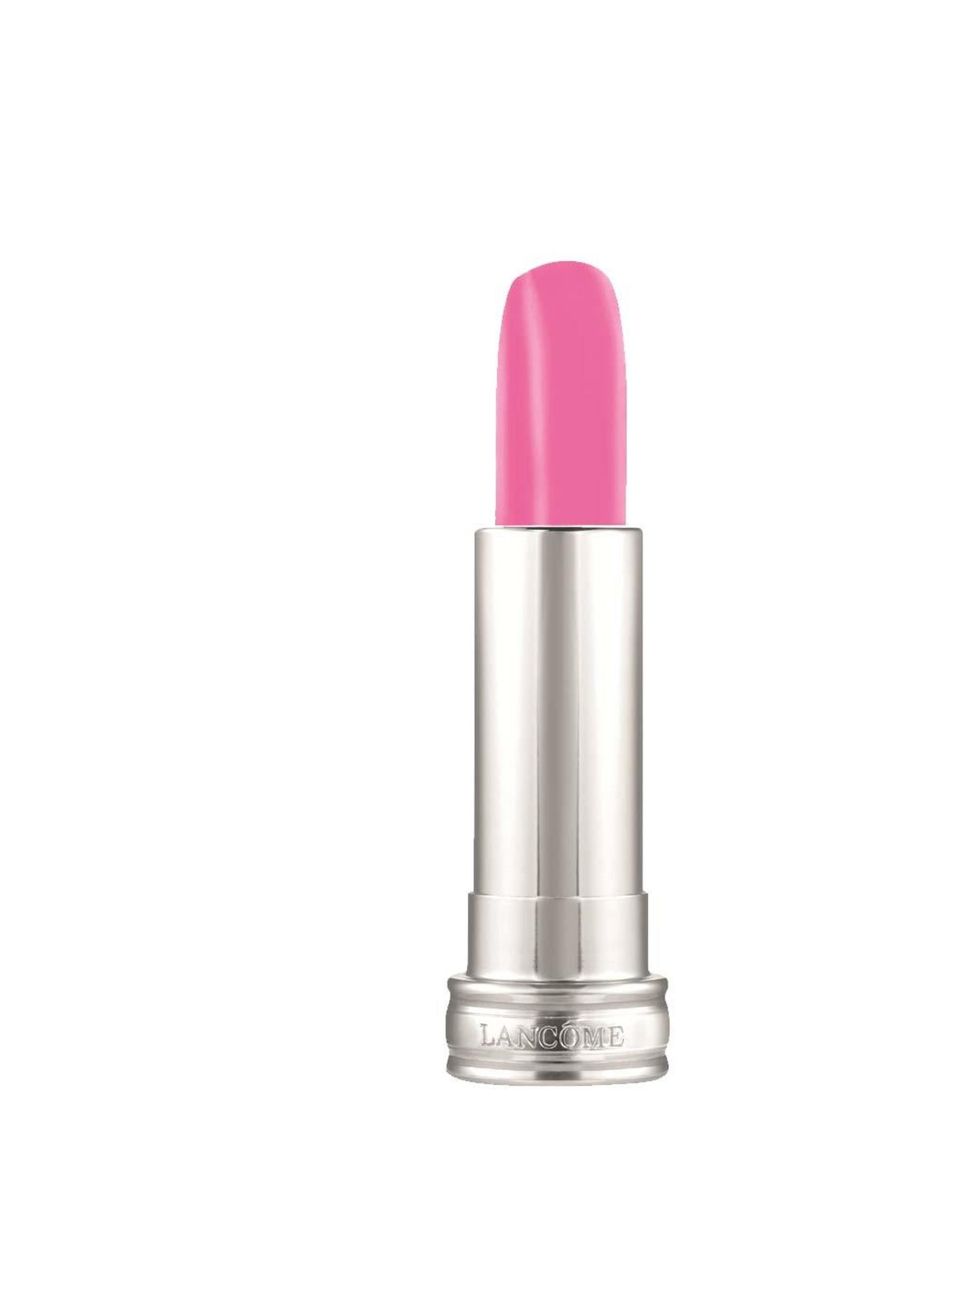 <p>There's little more happy-making than a neon lip balm. Especially one with a name as perfect as this. <a href="http://www.lancome.co.uk/_en/_gb/makeup/exclusive-collections/in-love-collection/baume-in-love-337032.aspx">Lancôme Baume In Love</a> in Rose